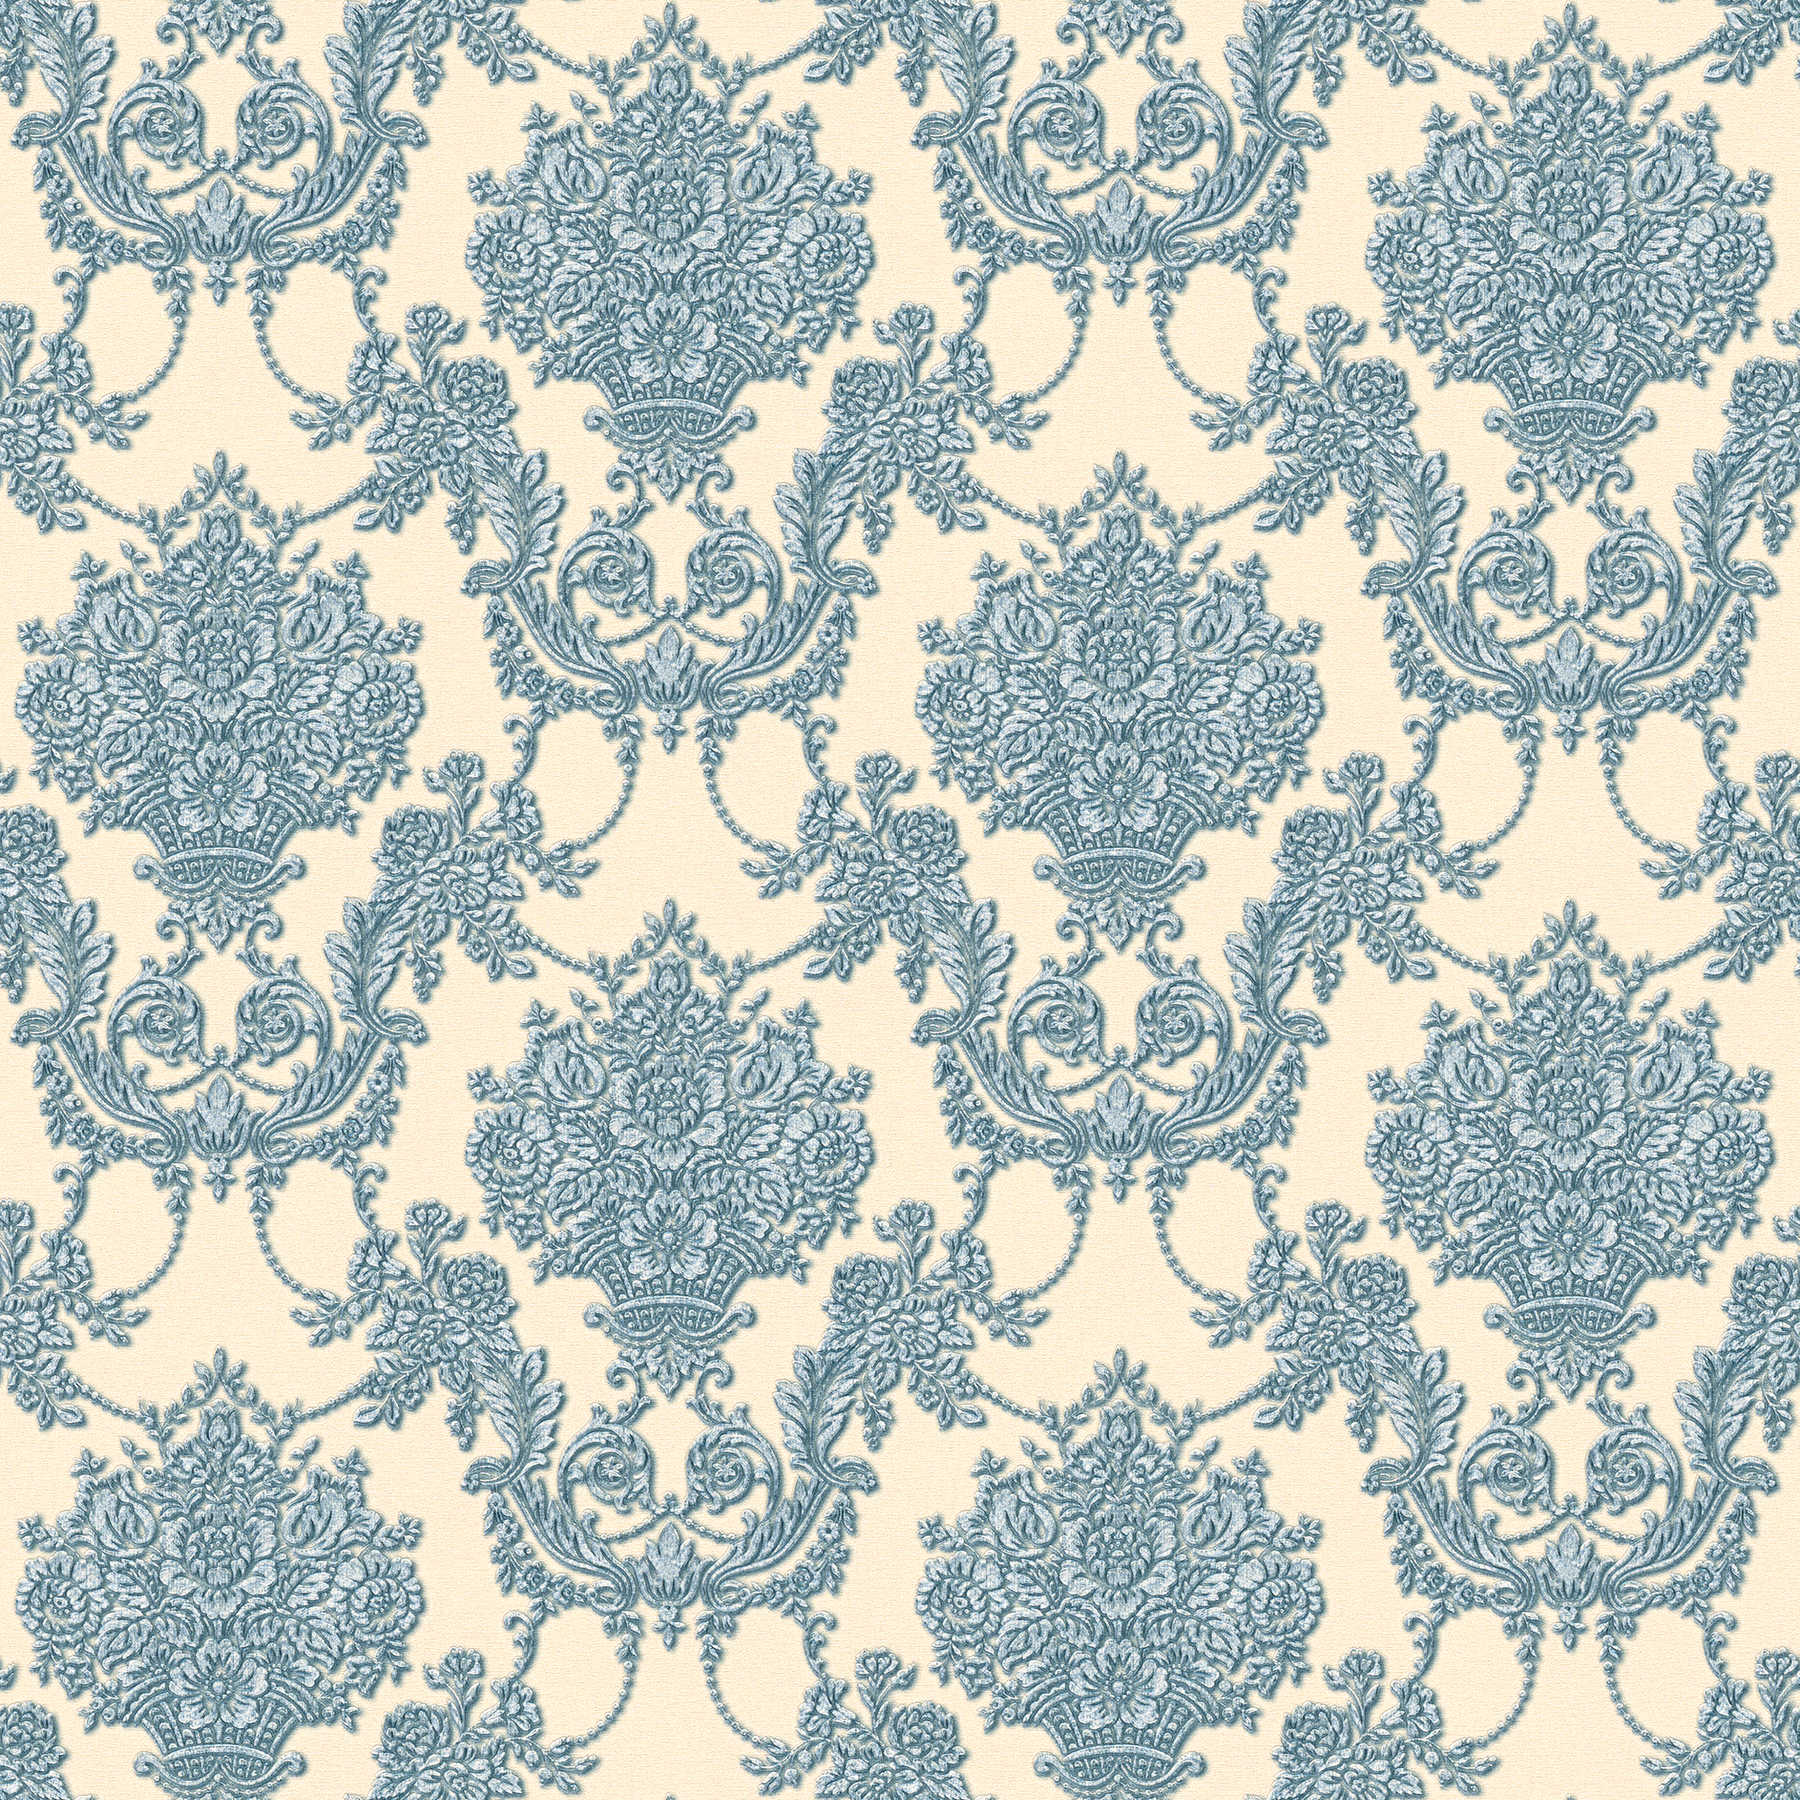 Ornamental wallpaper floral with metallic accent - beige, blue
